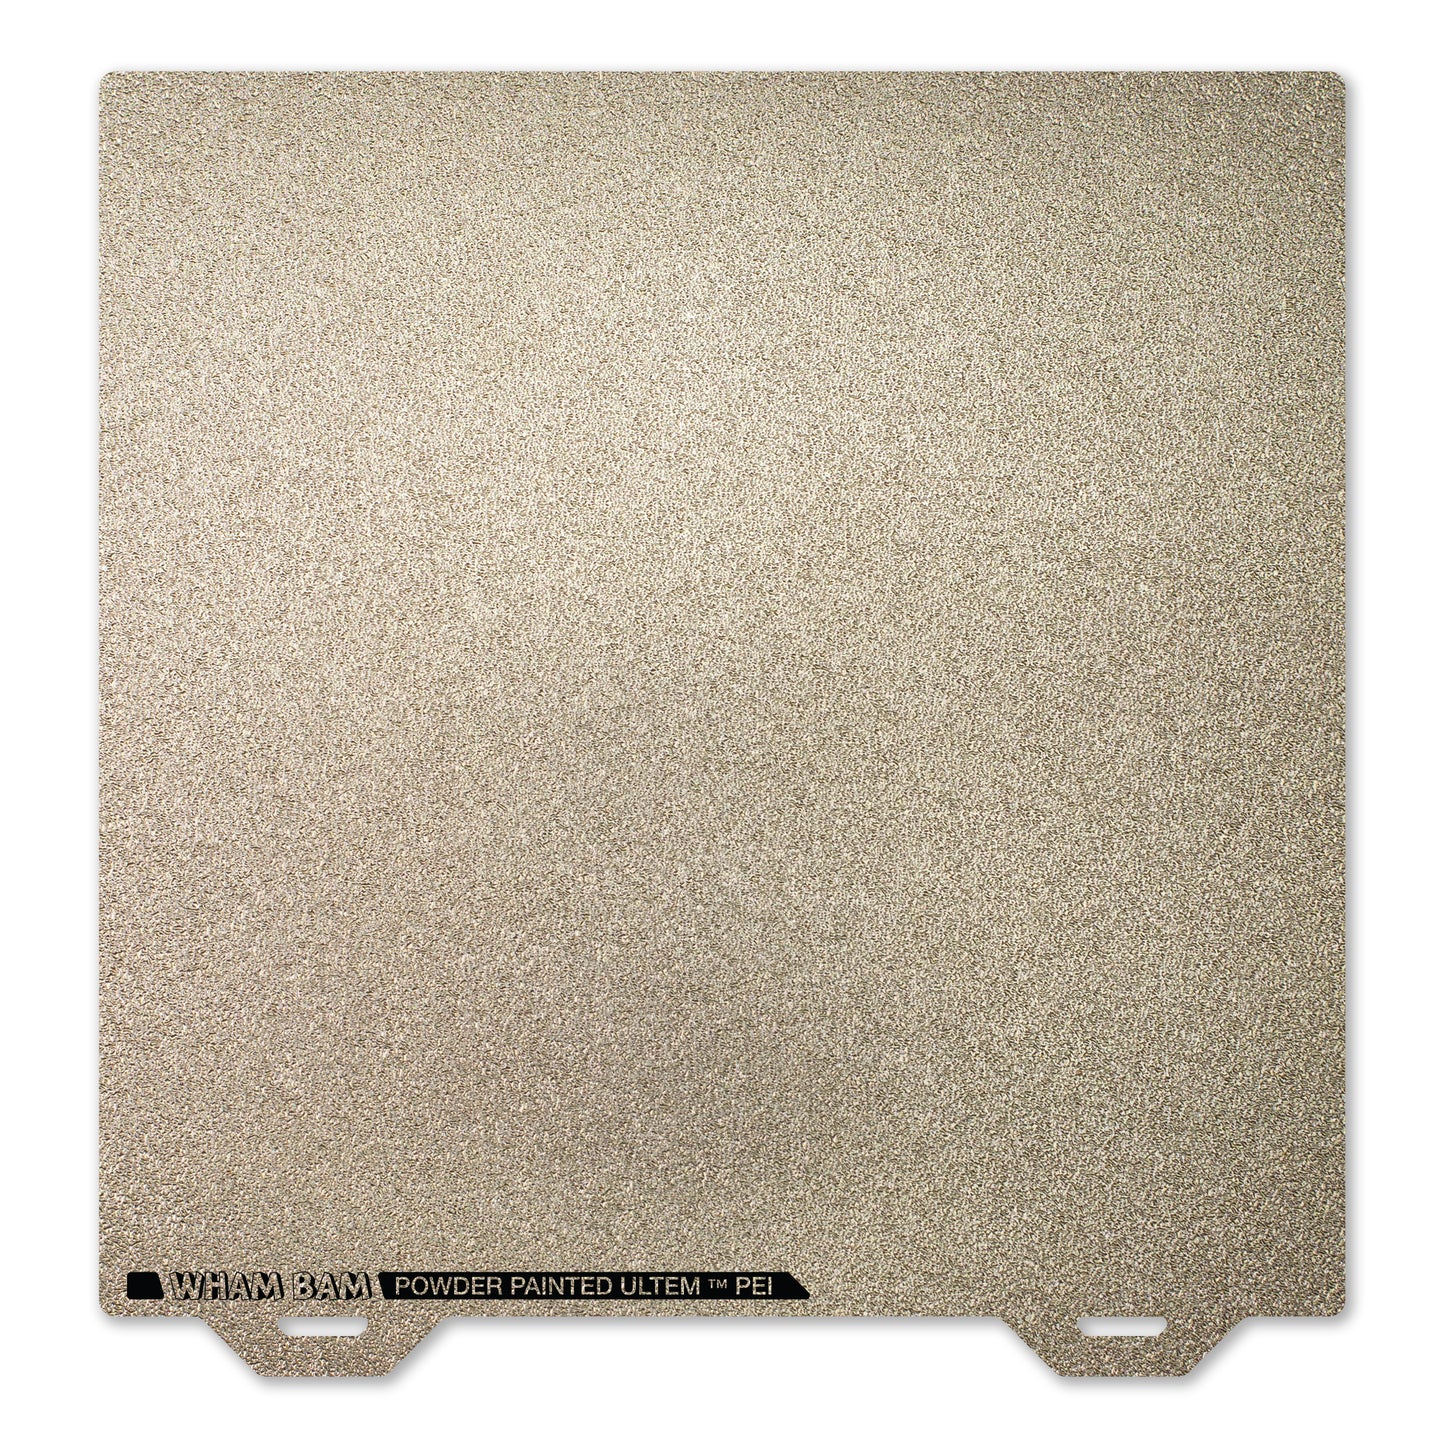 Flexi Plate with Textured ULTEM PEI - Creality Ender 2 Pro - 165 x 165